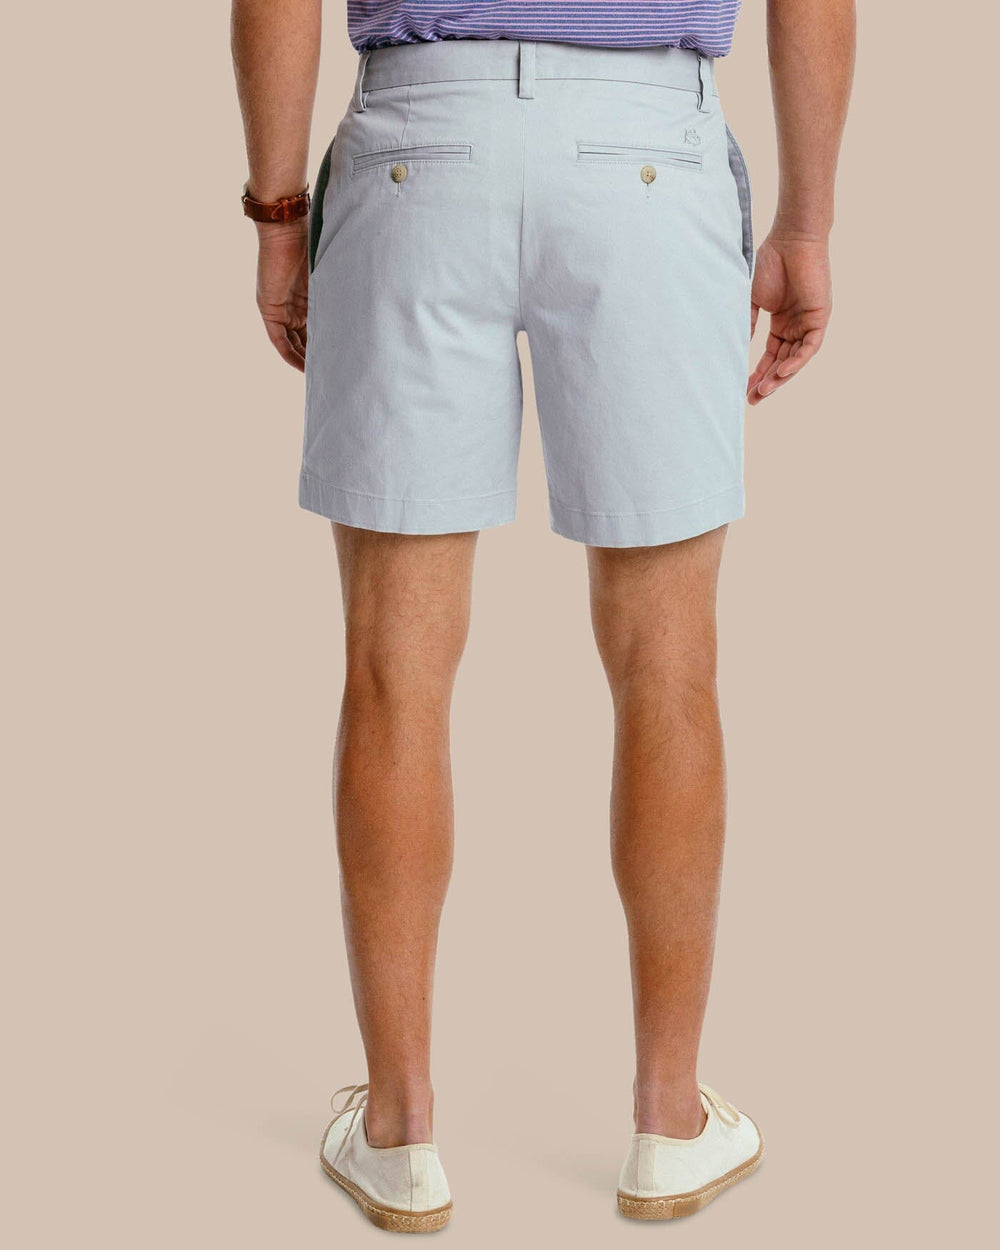 The back view of the Men's New Channel Marker 9 Inch Short by Southern Tide - Seagull Grey